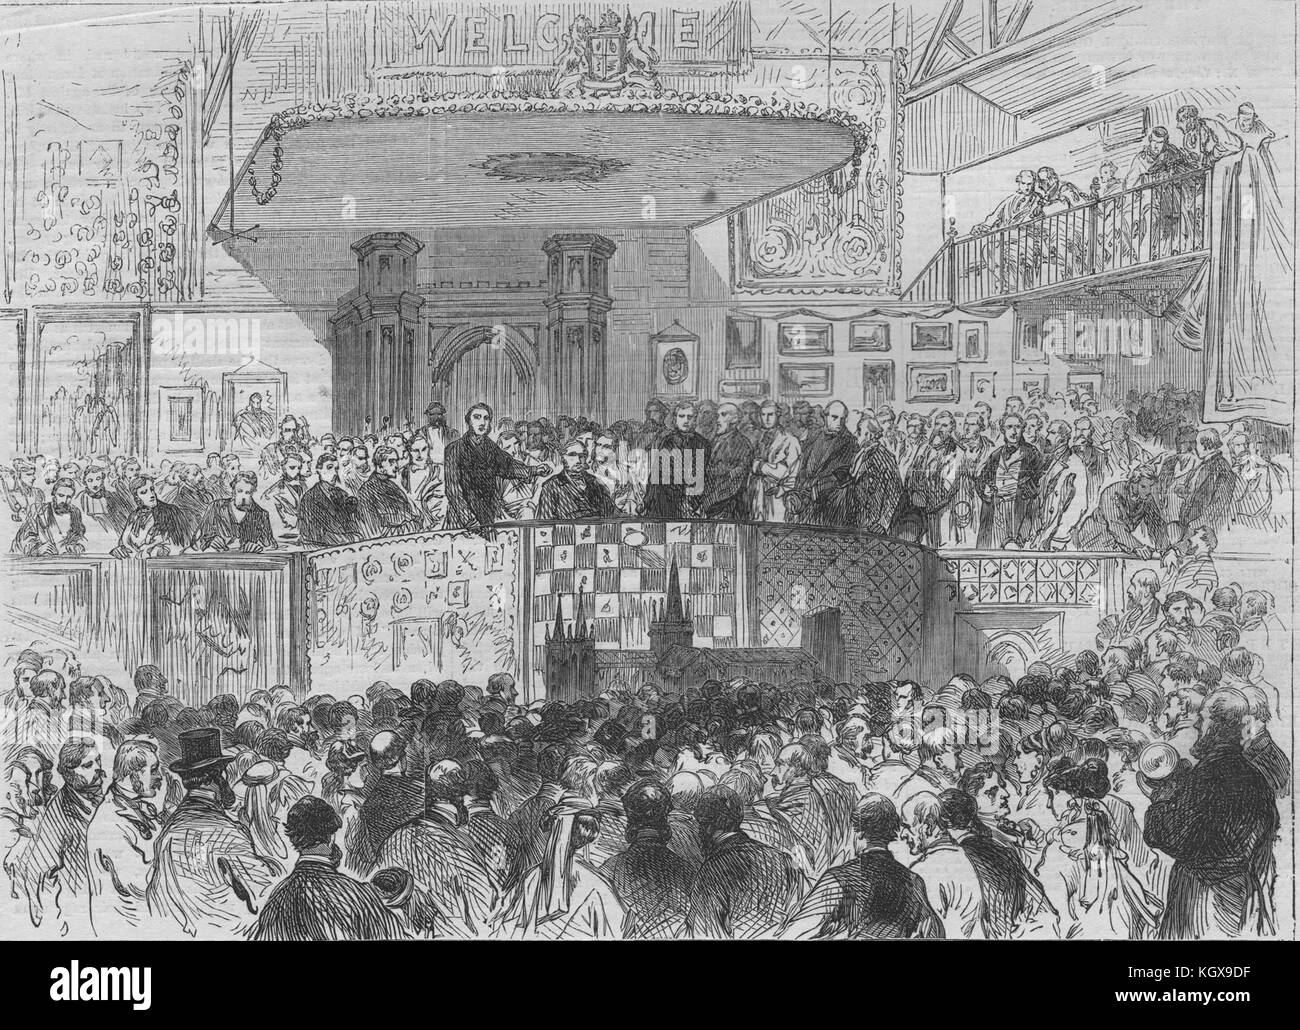 The South London Working Classes' Industrial Exhibition, Lambeth Baths 1869. The Illustrated London News Stock Photo